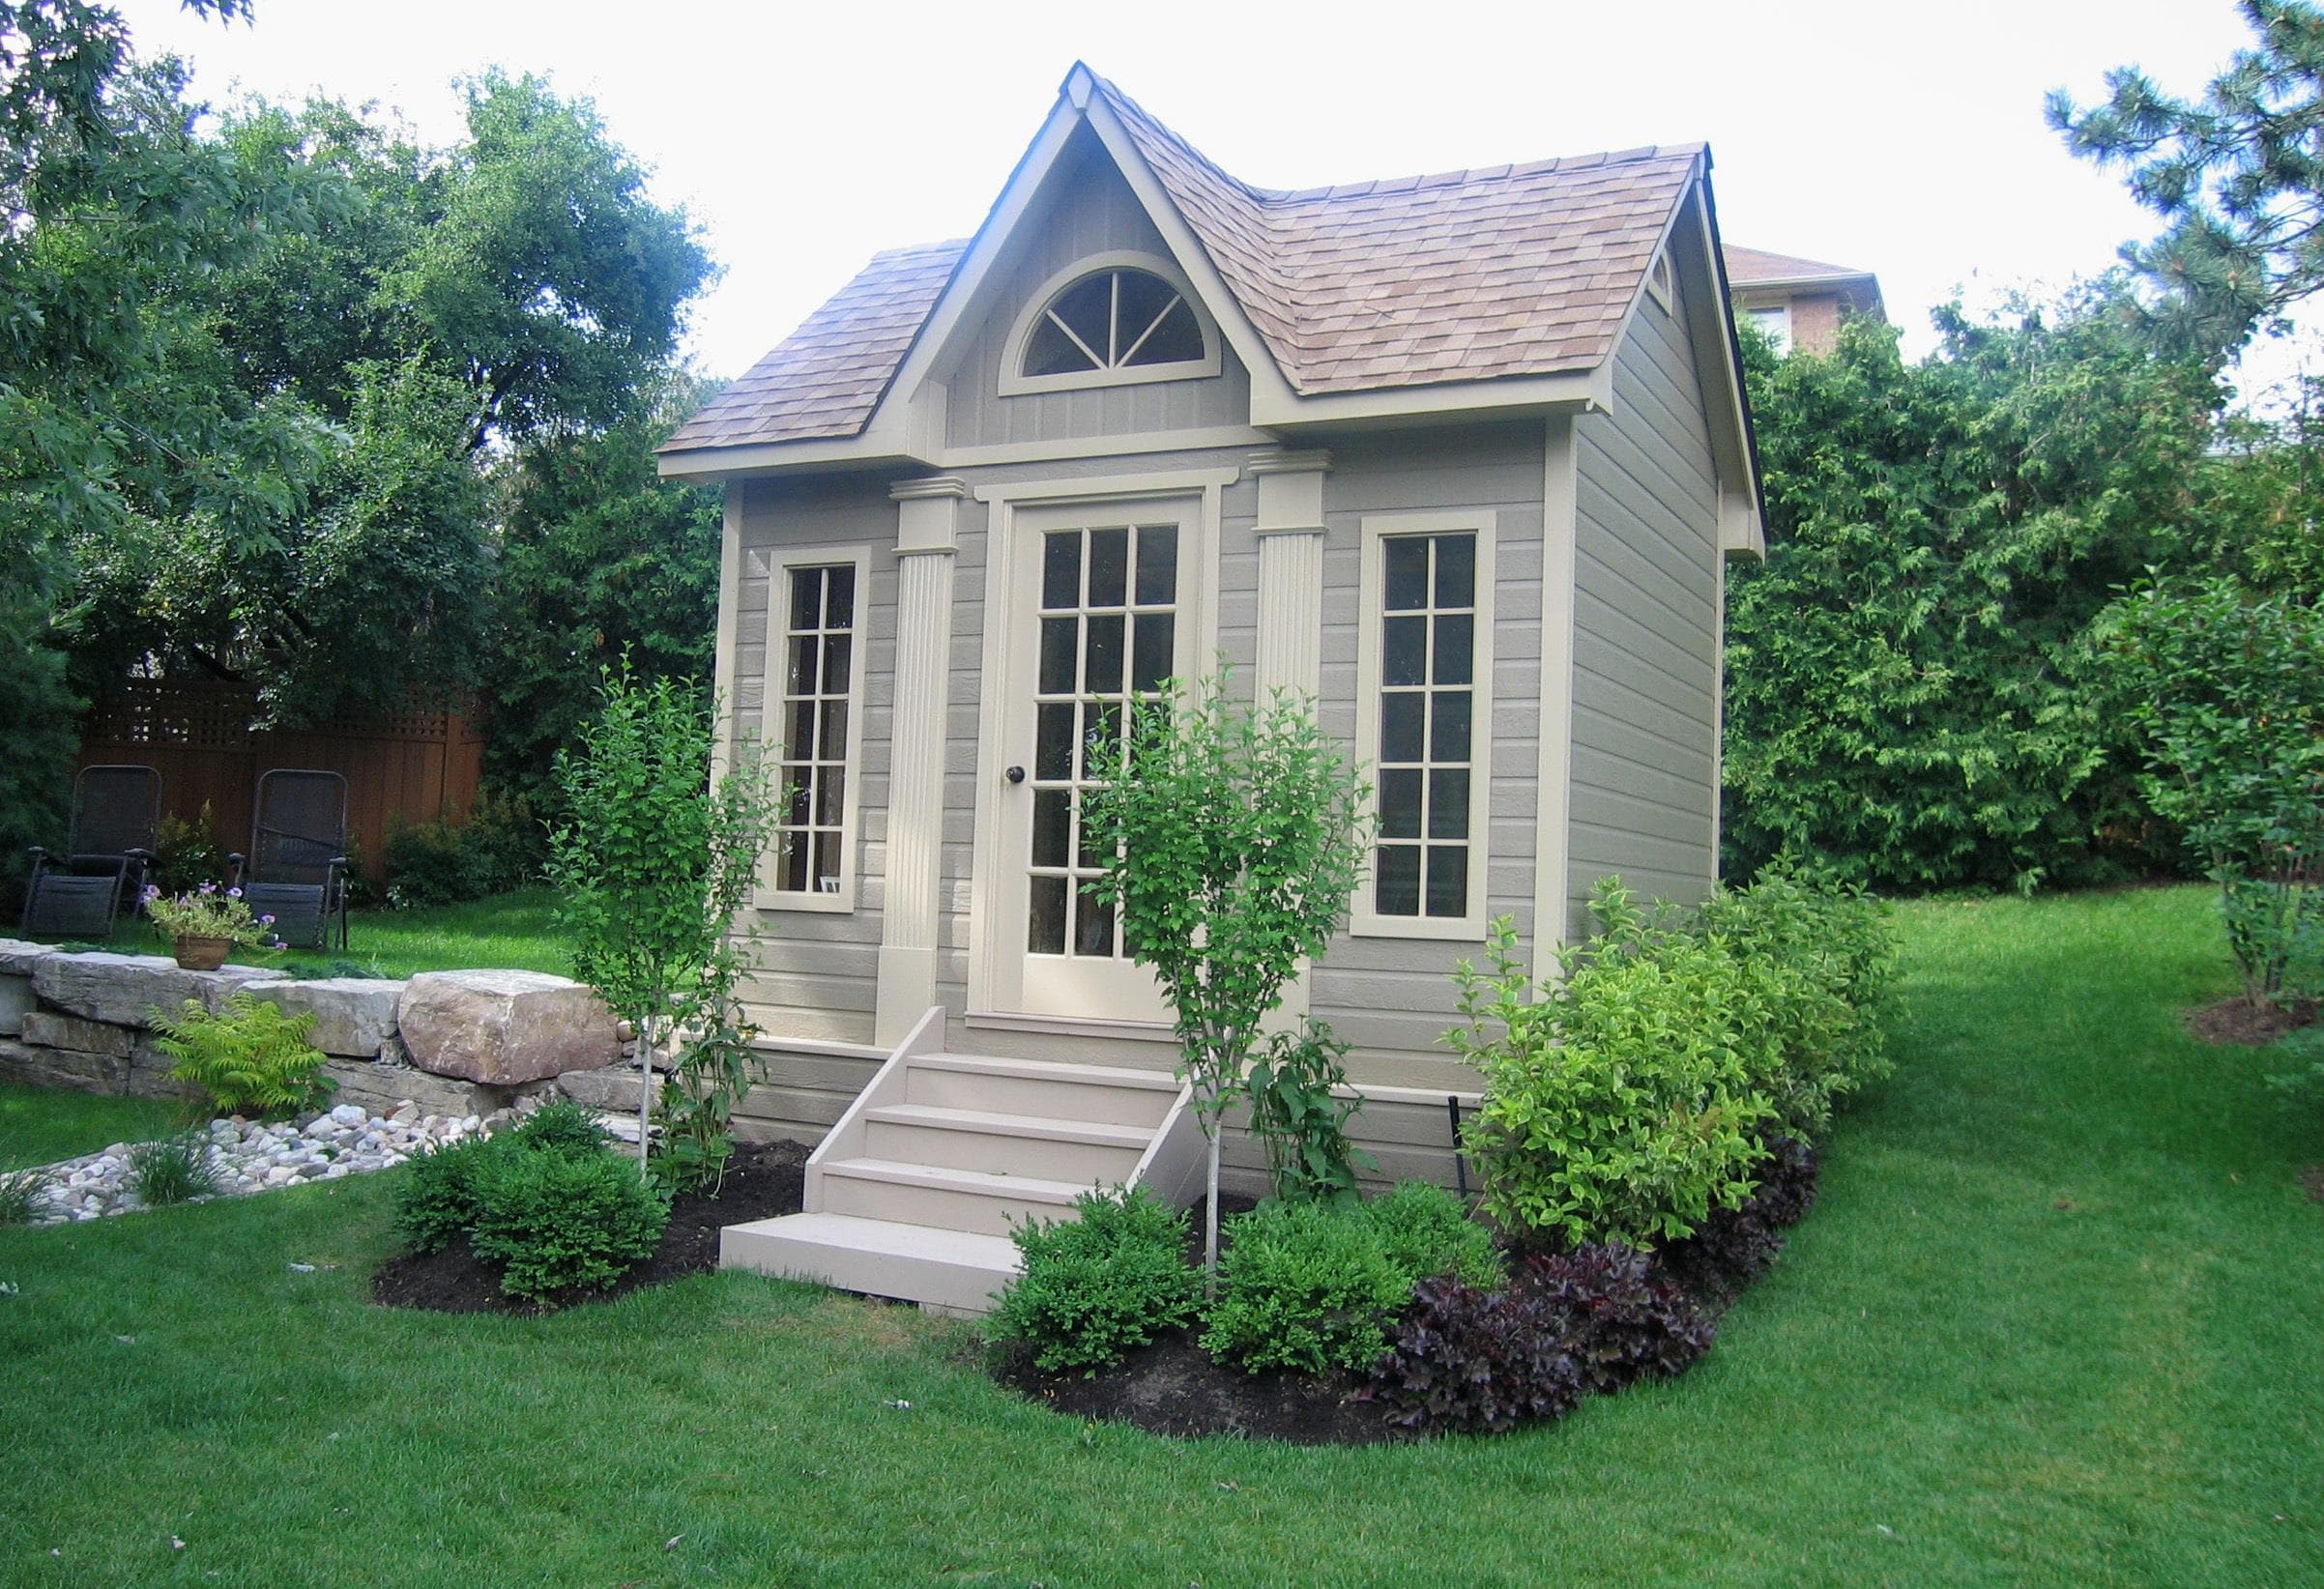 Copper Creek 8x12 pool house with sidelite window in Toronto Ontario. ID number 42348-2